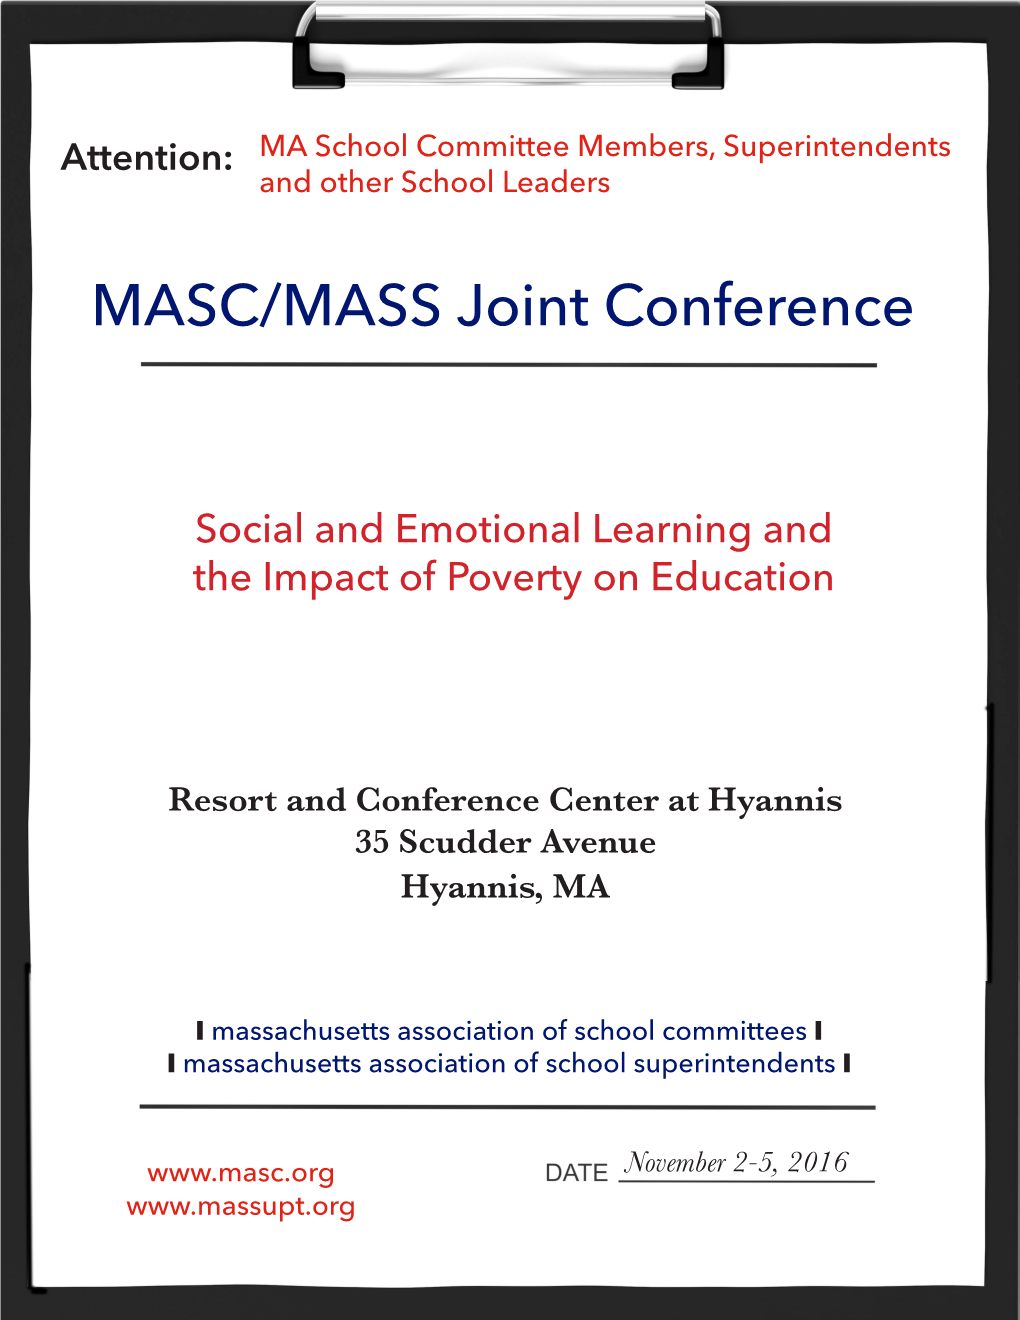 MASC/MASS Joint Conference